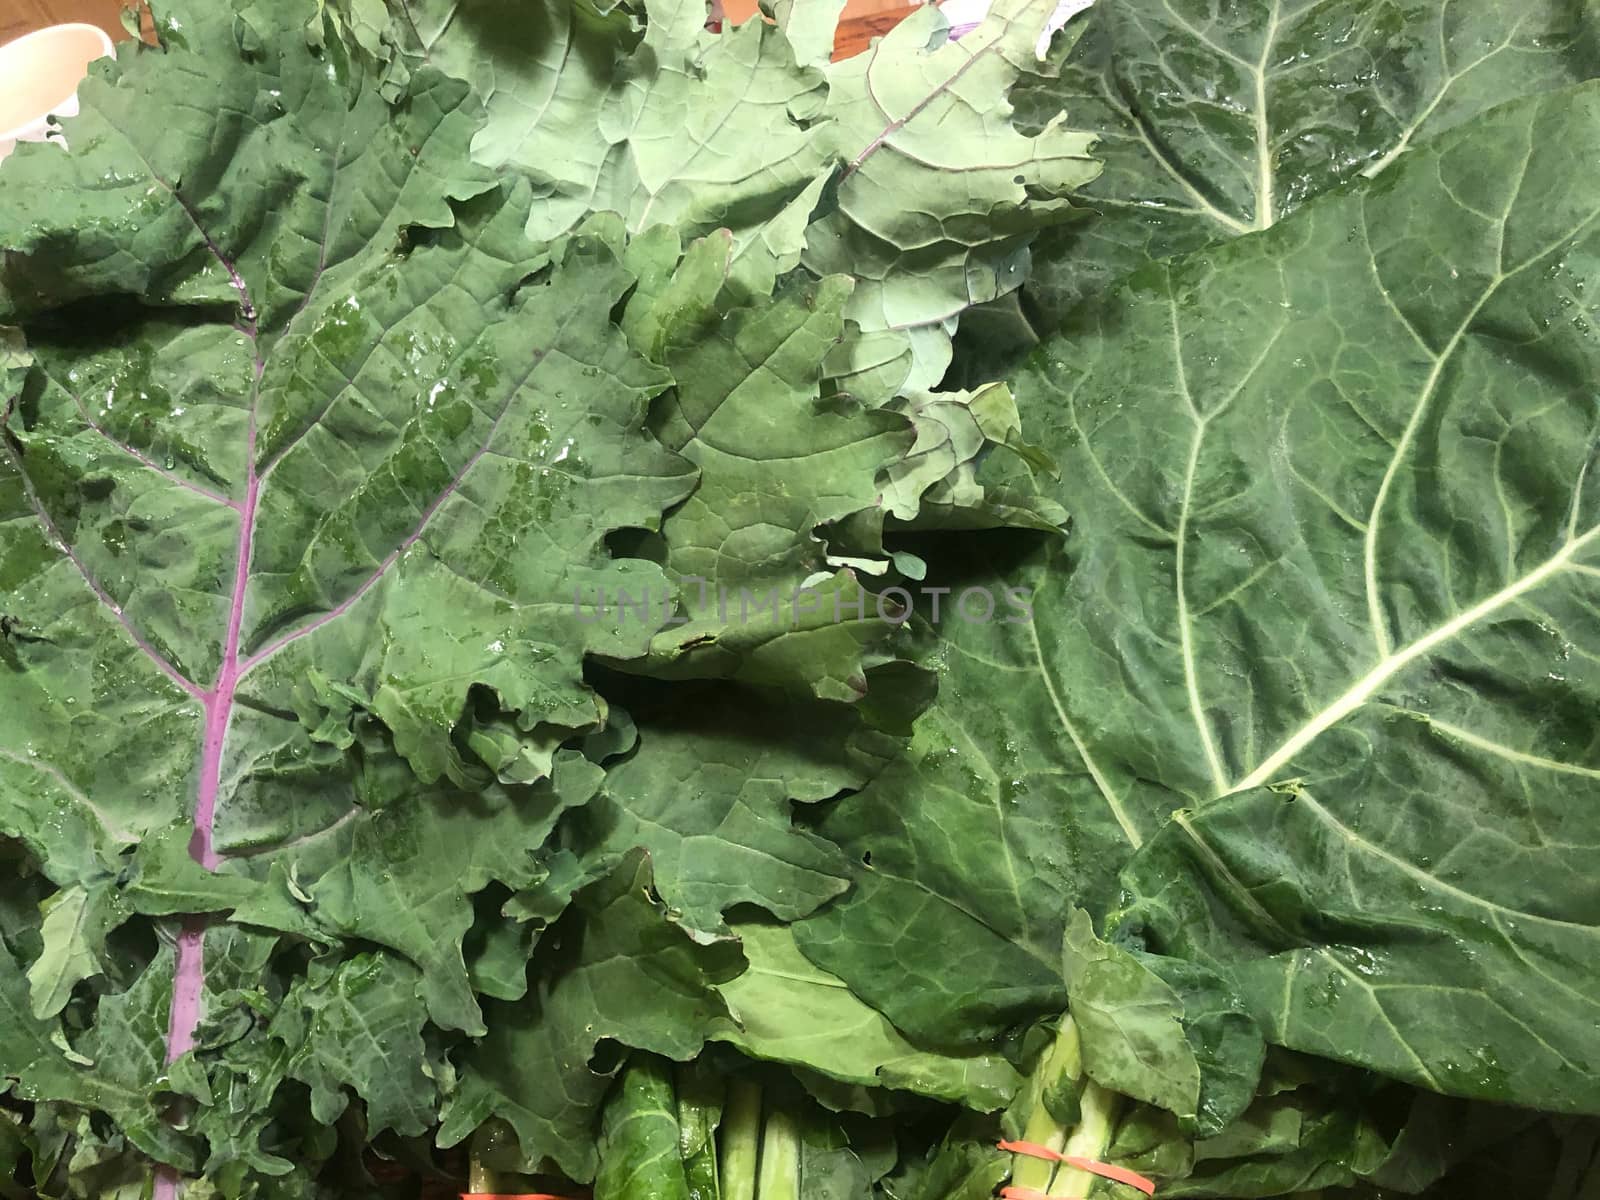 Beautiful bright leafy green vegetables stacked out for sale. Abundance and organic textures and colors.